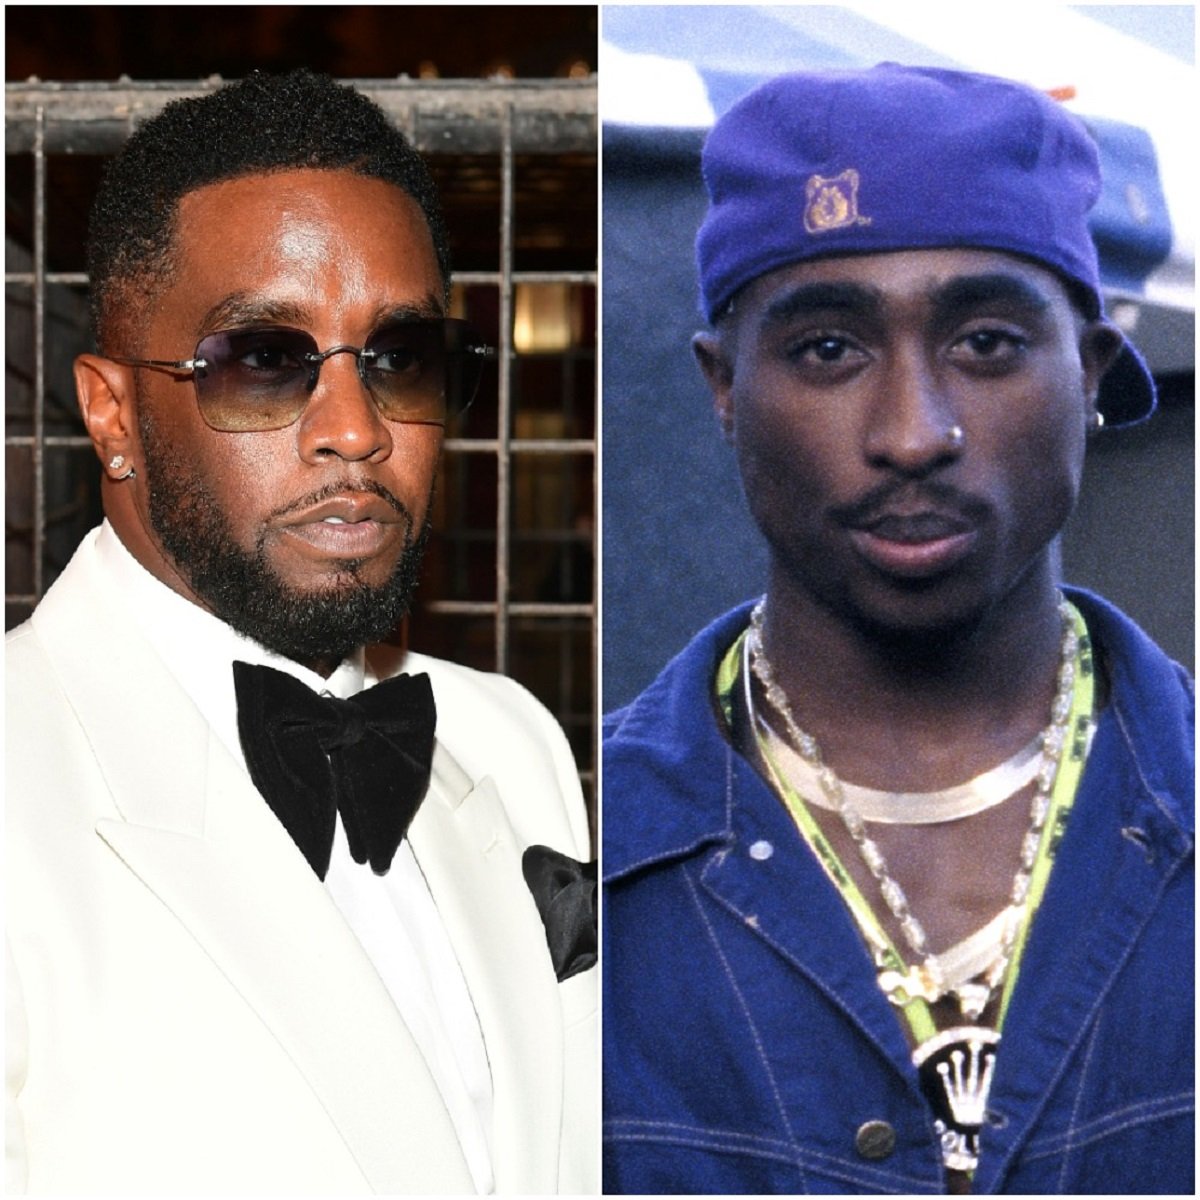 (L) Sean Diddy Combs attends Black Tie Affair, (R) Tupac Shakur backstage at 1992 Summer Jam